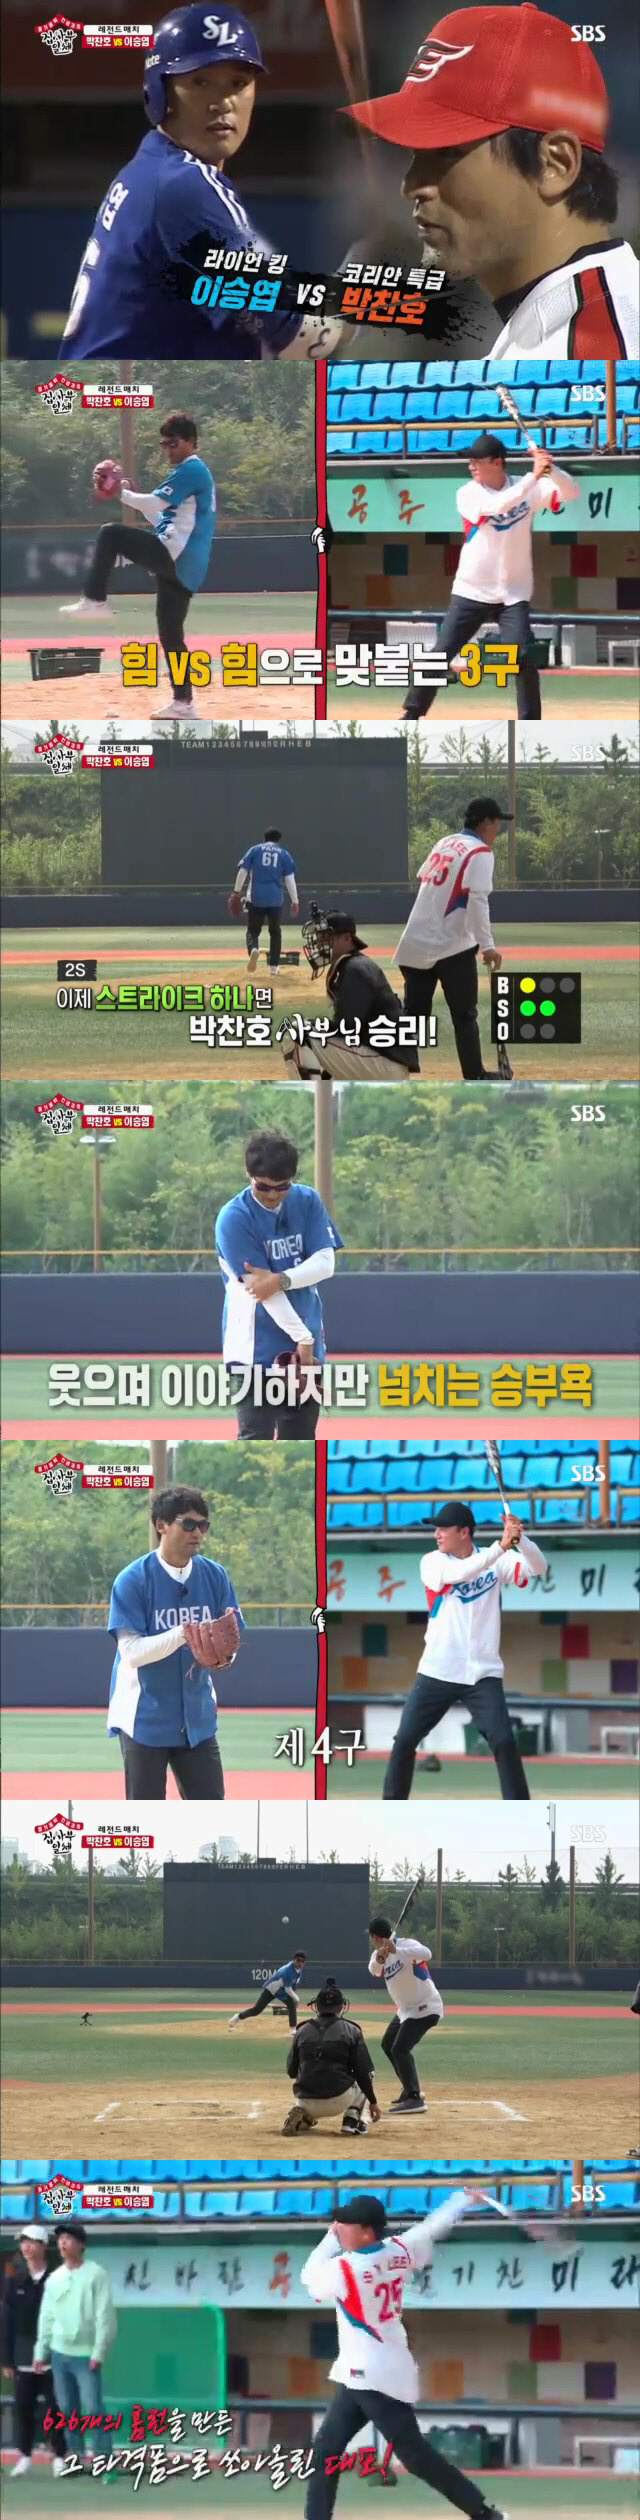 In SBS All The Butlers, two Baseball Legend Chan Ho Park and Lee Seung-yeops Battle took the viewers attention and became the best one minute.Lee Seung-gi, Lee Sang-yoon, Yook Sungjae and Yang Se-hyeong were heading somewhere with the training tool Kumho Tire in All The Butlers broadcast on the 27th.It was a neighborhood where Chan Ho Park lived as a child, and the alley was named Chan Ho Park.Chan Ho Park said, I dragged the Kumho Tire ten times every night, I never walked up to my house, I was not happy to walk.His past remained at the house of Chan Ho Park, which is now a memorial.In a diary written by Chan Ho Park in 1991, I am tired of repeated Exercise every day, but I think it is the right way to overcome it.I will do whatever difficulties I have for my goal and future.I have a strong belief to do, he said, suggesting the troubles of young Chan Ho Park and the efforts to overcome it.Chan Ho Park later cited patience as creating a special player.Patience is the only thing that makes me passionate, he said. Patience and effort are the fruits of one more than I did.The following day, Chan Ho Park and its members headed to Princess City Chan Ho Park Baseball, named after Chan Ho Park.Lee Seung-yeop, a national hitter, appeared as a surprise guest in front of the members who wanted to start Baseball there.Lee Seung-yeop, who has been on the air for a long time, said, I was not able to refuse as a junior because I had a lot of help from Chan Ho.Lee Seung-yeop, on the other hand, expressed Chan Ho Park as a senior who takes off unconditionally when his juniors are in trouble.I retired and paid more attention to my future than my family, and I am so grateful, he said to Chan Ho Park.The members decided to share the team and play the Baseball match.Lee Seung-gi and Yang Se-hyeong were trained in pitching and batting, respectively, with Chan Ho Park team, Lee Sang-yoon and Yook Sungjae as Lee Sang-yeop team.Then the full-scale match began: Kyonggi was played in a three-round, one-on-one battle.Lee Seung-yeop and Lee Sang-yoon showed off a swing, but Yang Se-hyeong caught the ball with a diving catch and the victory went to Chan Ho Park team.Lee Seung-gi then suggested Chan Ho Park and Lee Seung-yeops Battle, saying, Do you intend to wash away the humiliation of the team with Kyonggi?Two baseball legends Battle came to an end: Lee Seung-yeop swung in the manned ball at Chan Ho Park, and the second was a fast ball with tremendous speed.Lee Seung-yeop showed a perfect blow, but the ball fell behind the Kyonggi field, so if you hit a strike, Chan Ho Park would win.Chan Ho Park threw the fourth ball, and with the tensions hovering, Lee hit the fence and led to a cheering of everyone.The two legends, who enthusiastically fanned Baseball fans, also took the best one minute with TV viewer ratings rising to 9.3% (based on Nielsen Korea and the metropolitan area).Finally, Lee Seung-yeop said, It was good to wear a uniform with a friend for a long time. Sports can spread good energy to many people.I would like you to watch all the sports as well as Baseball with interest. Chan Ho Park also said, Korea Baseball Fighting.Meanwhile, the broadcast continued to rise to 8.3% of furniture TV viewer ratings, while 2049 target TV viewer ratings was 3.4%.